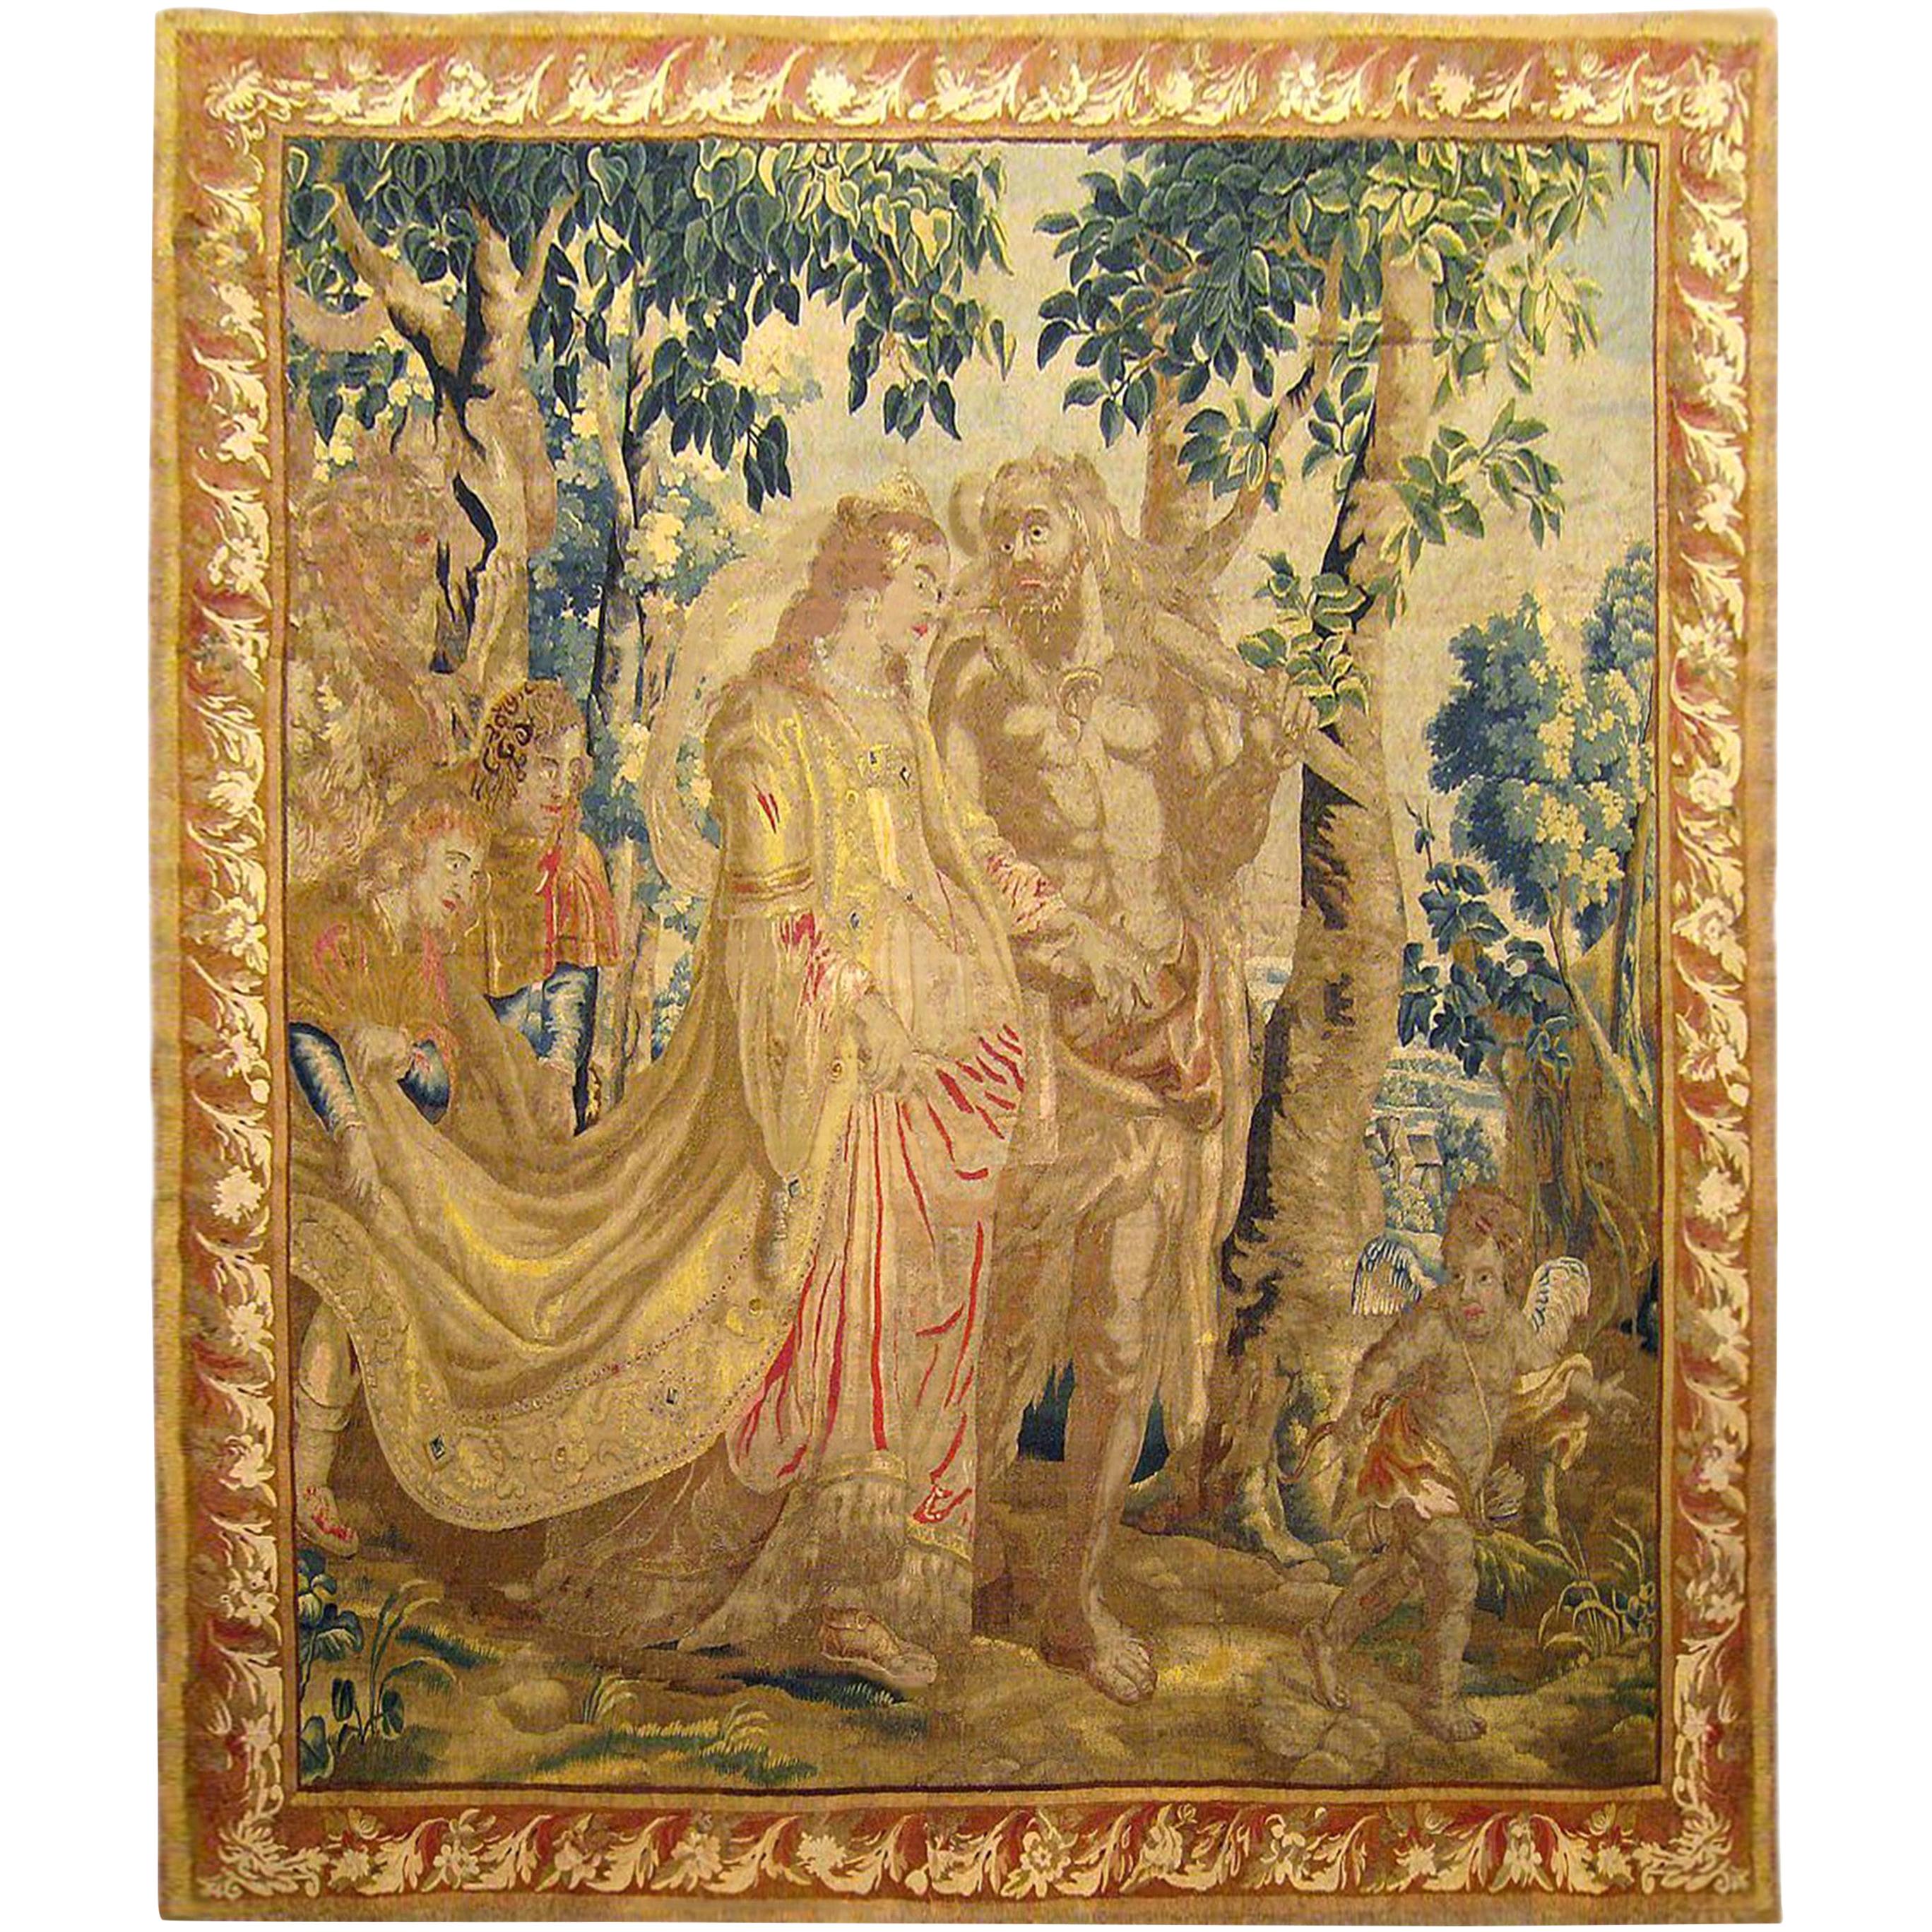 Early 18th Century Flemish Mythological Tapestry with Odysseus and Penelope